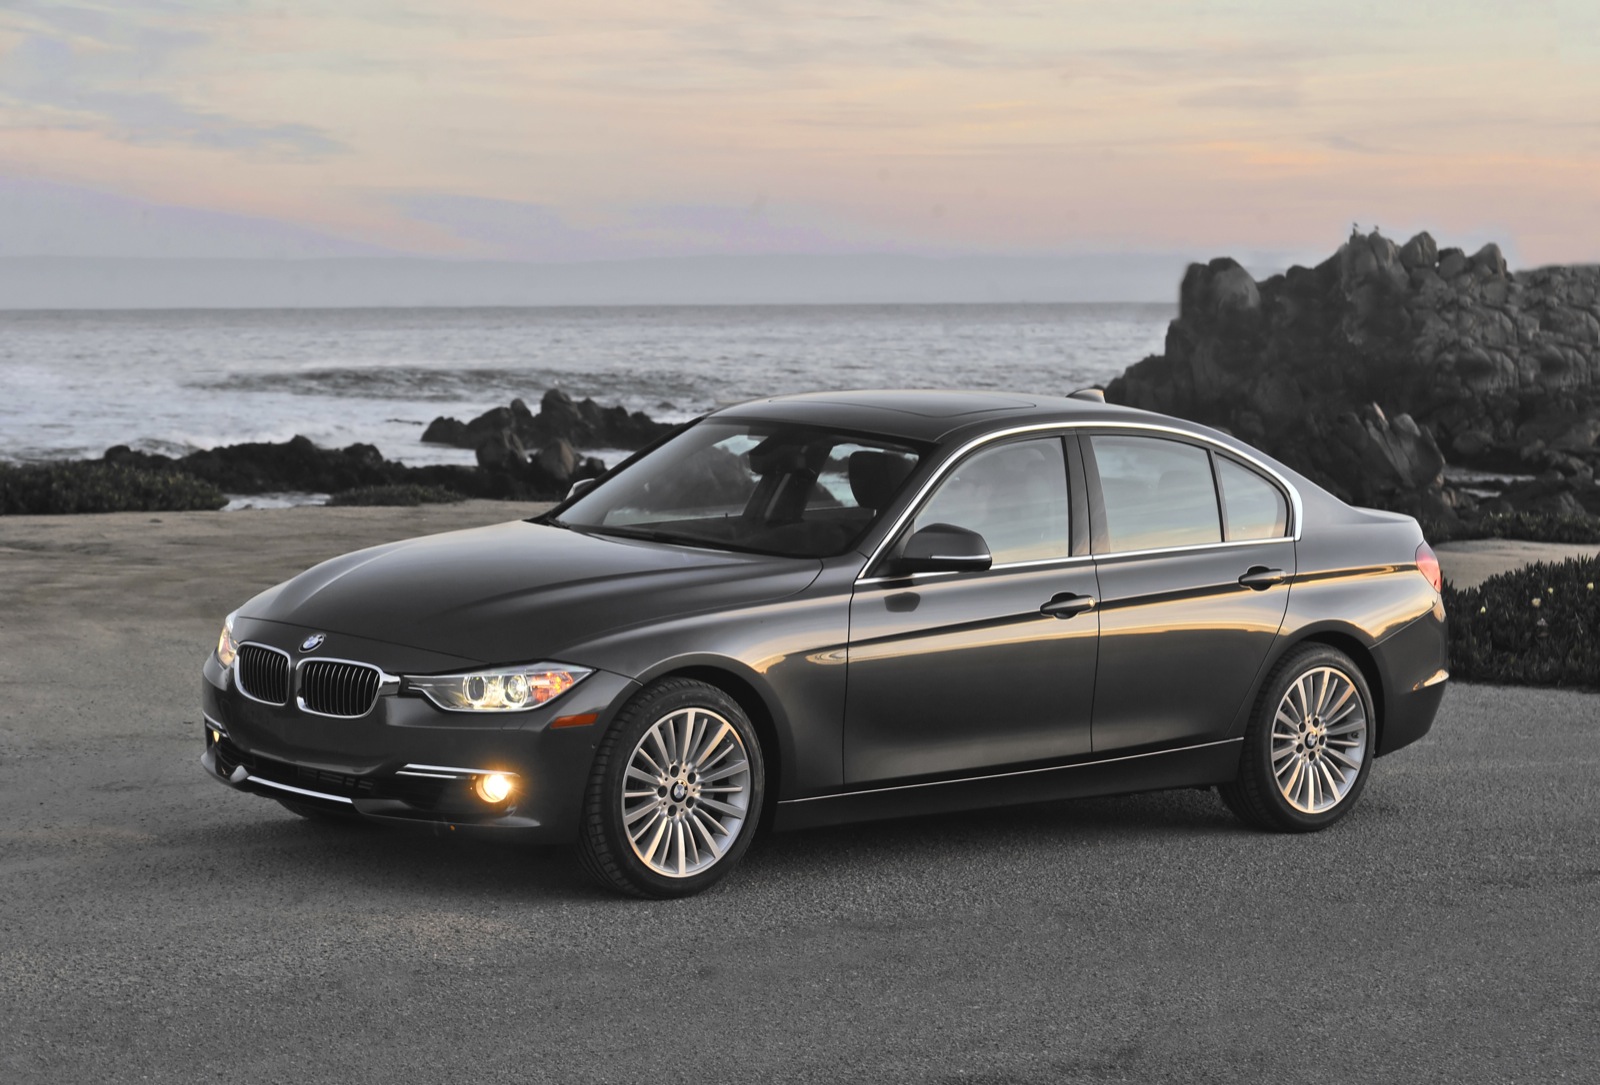 Multiple 2010-2012 BMWs recalled because engines could stall